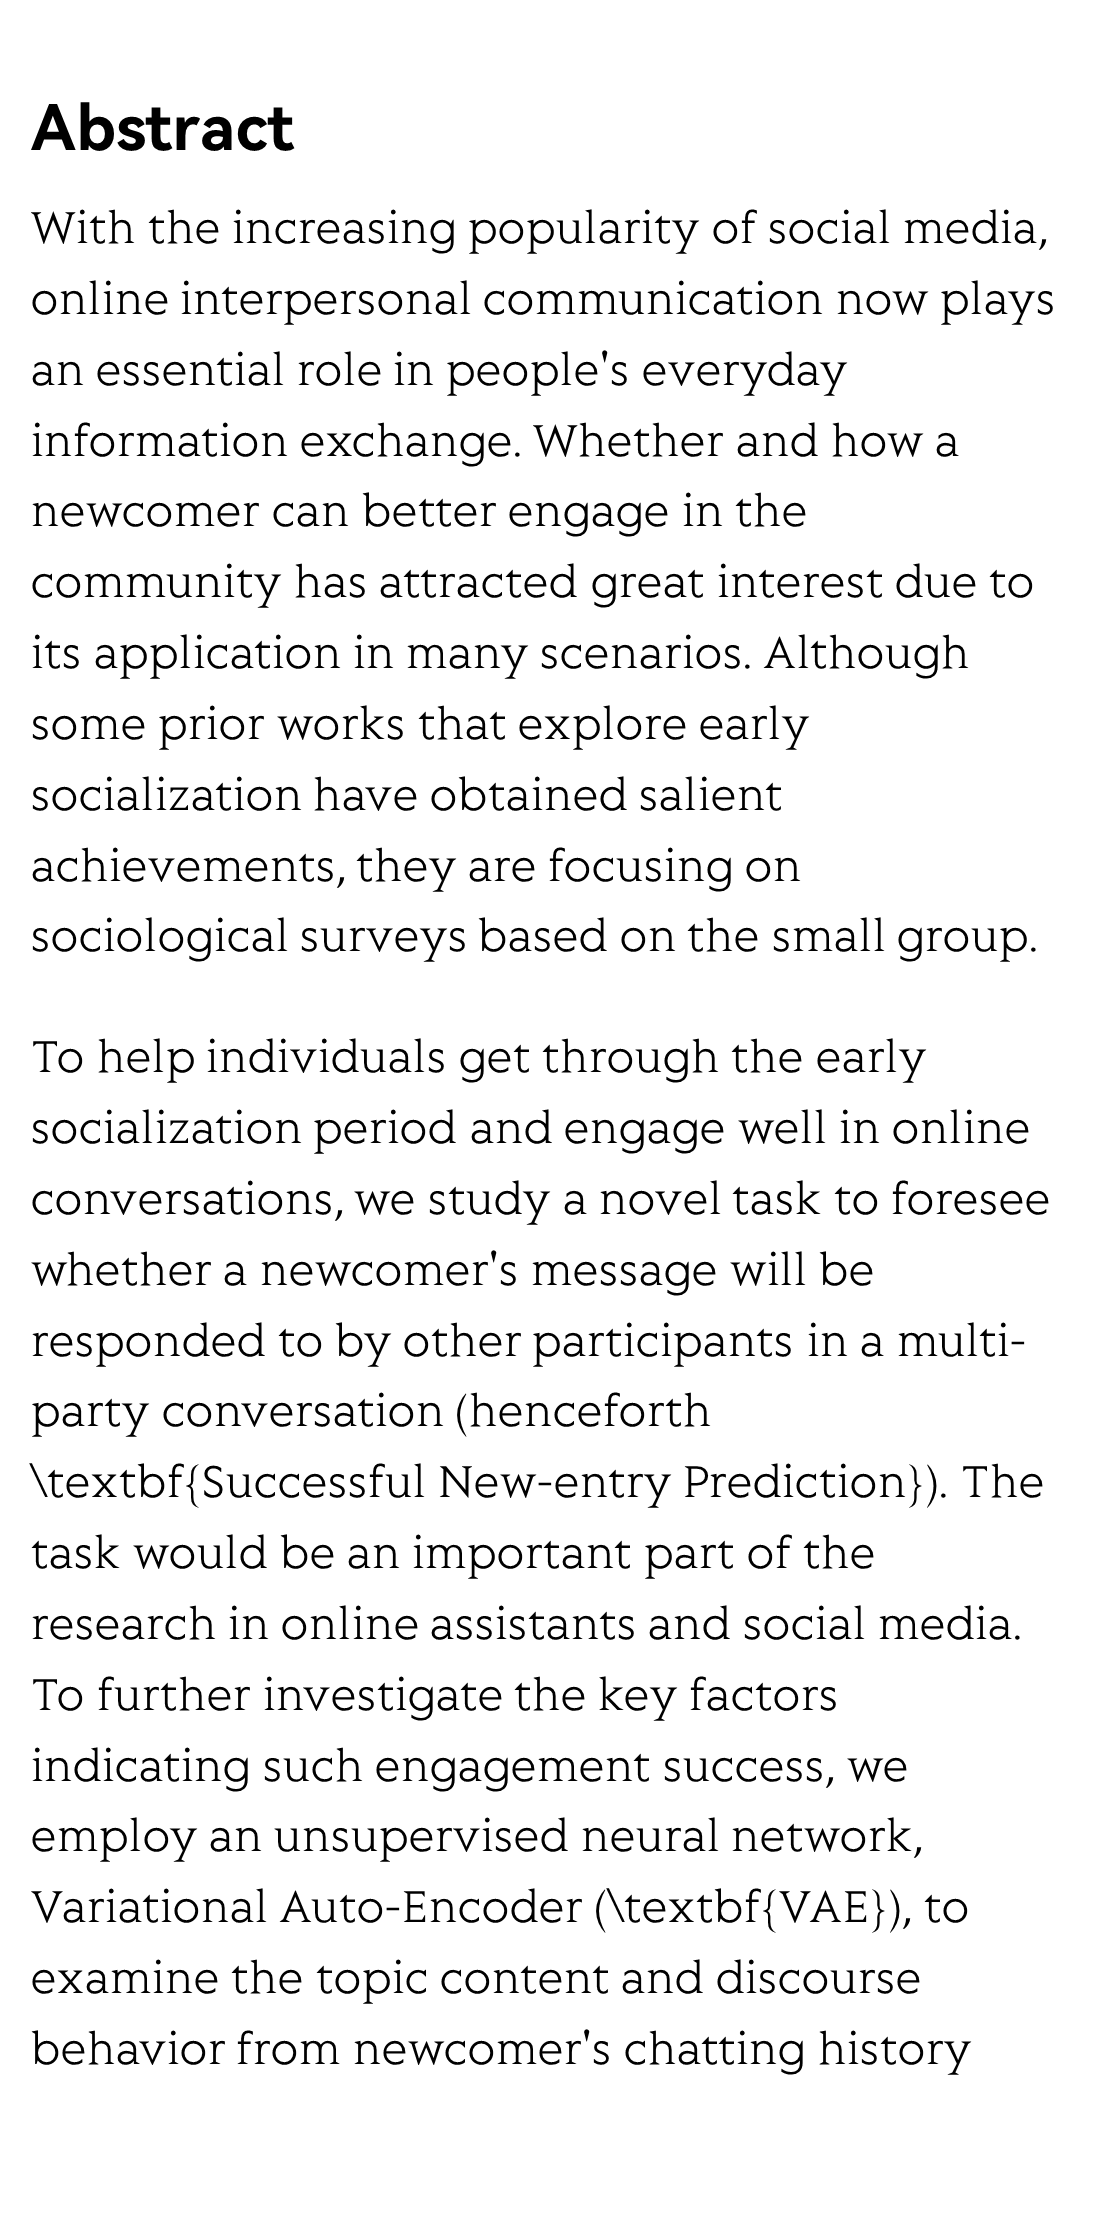 Successful New-entry Prediction for Multi-Party Online Conversations via Latent Topics and Discourse Modeling_2